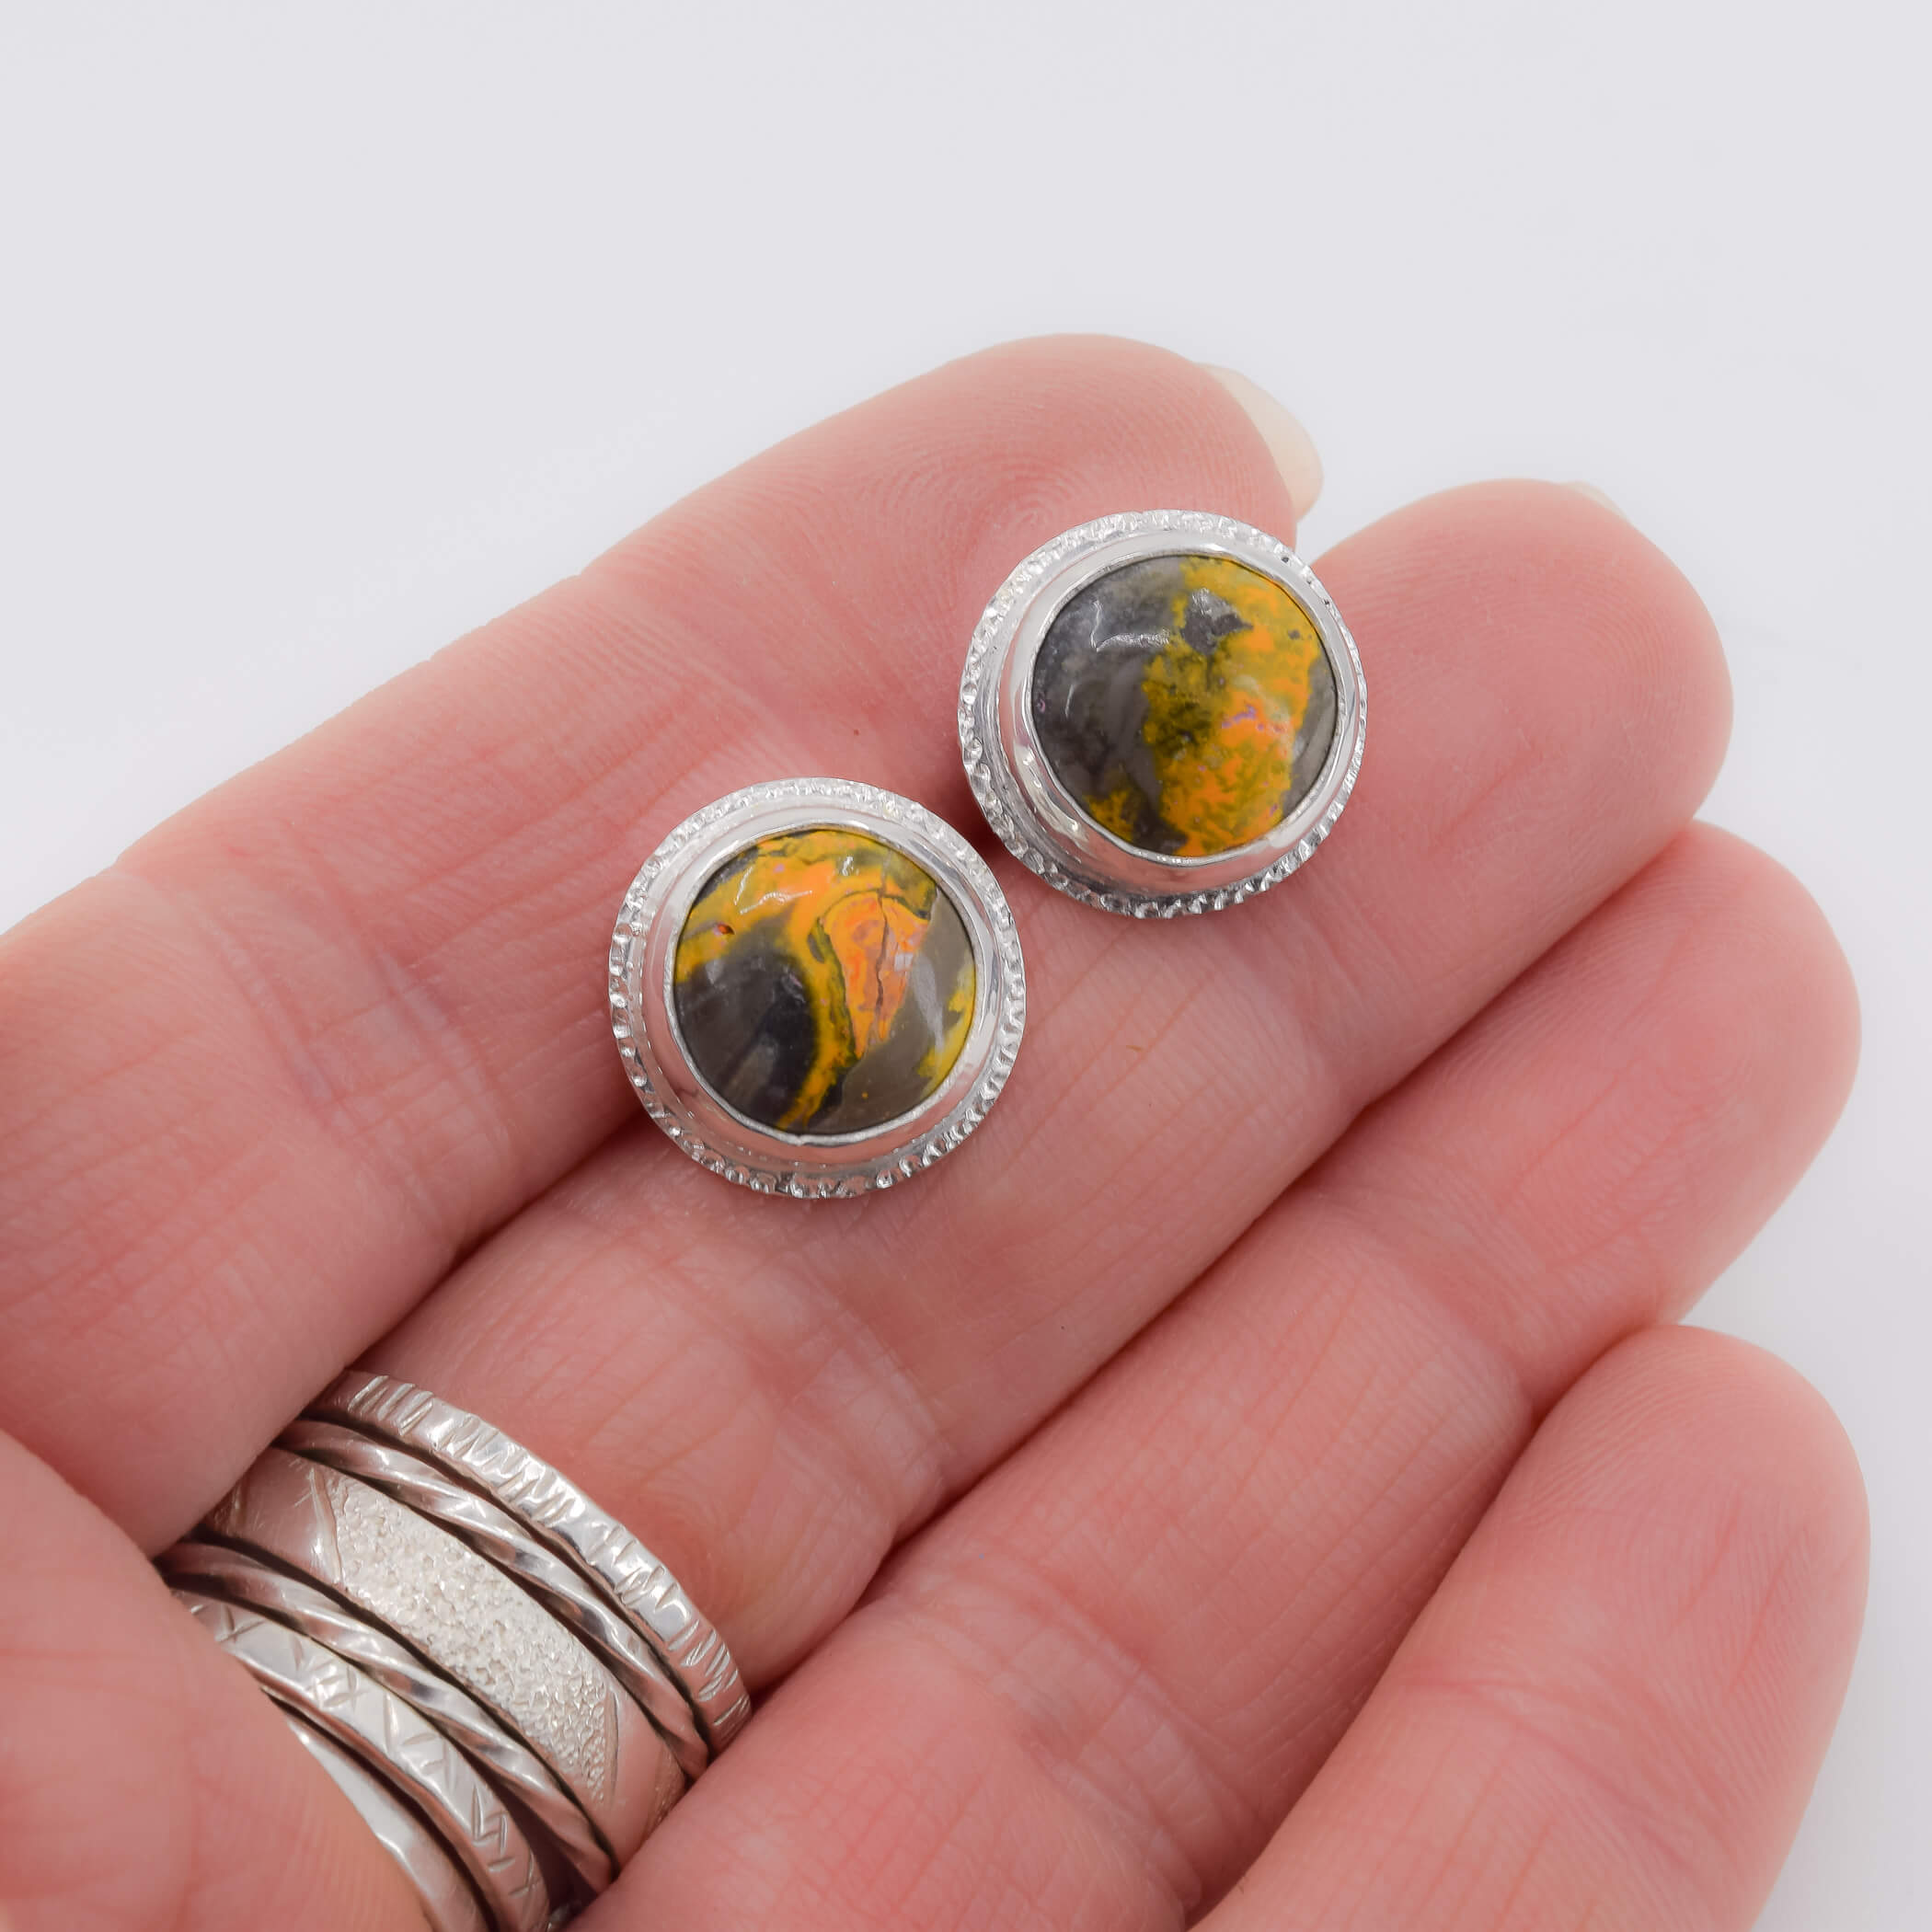 Round bumblebee jasper stud earrings in sterling silver shown in hand for scale